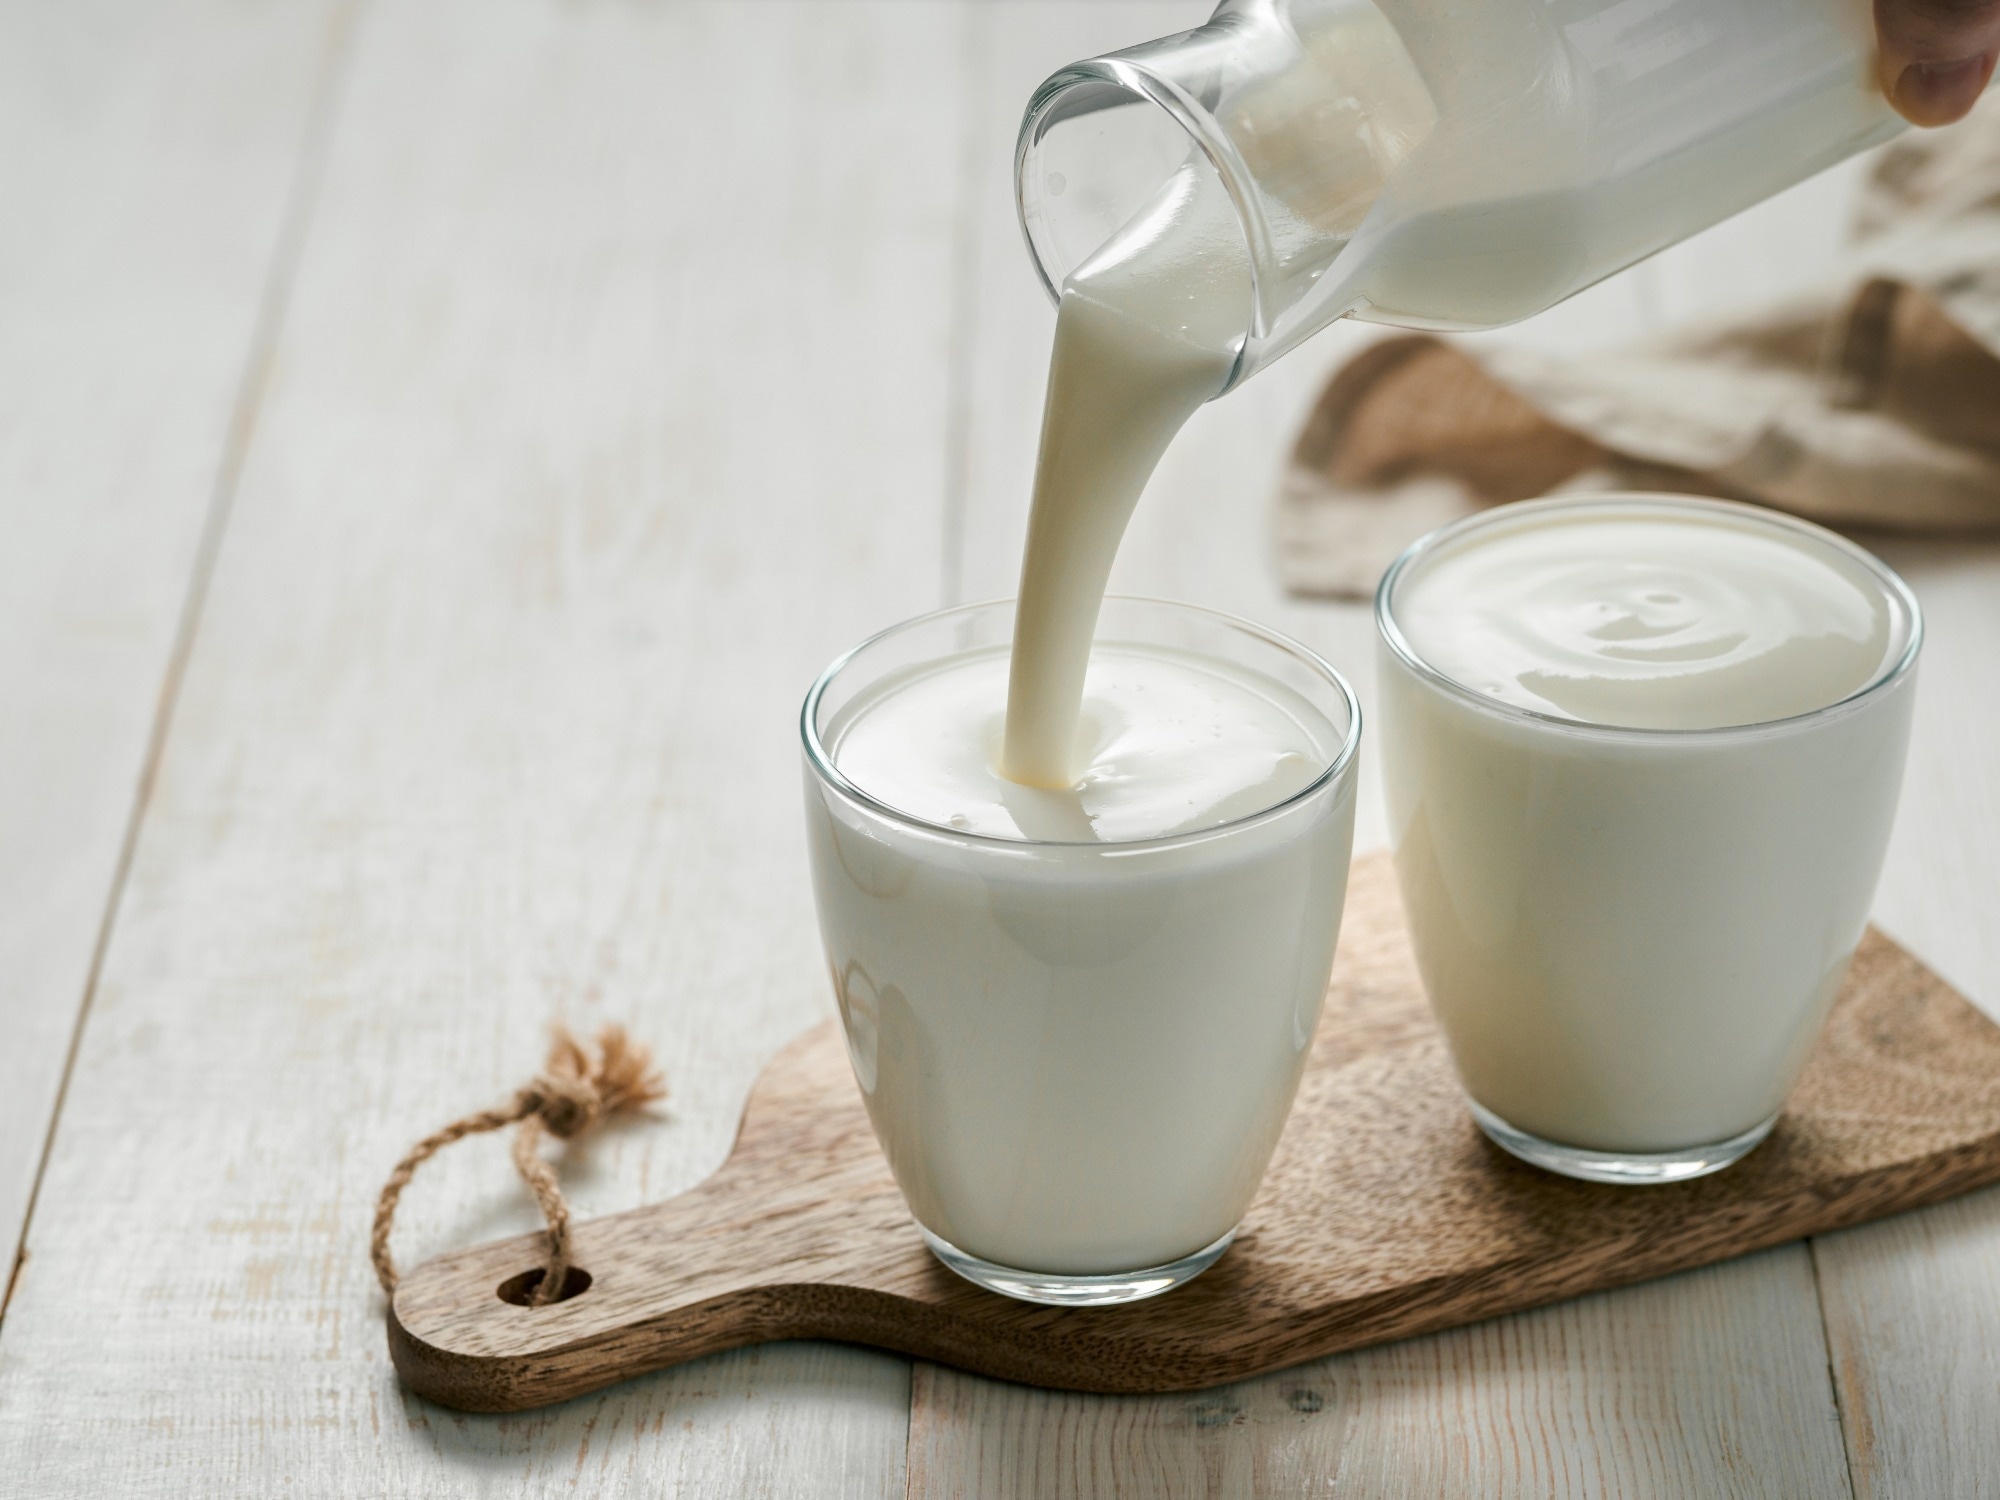 Study: Safety, feasibility, and impact on the gut microbiome of kefir administration in critically ill adults. Image Credit: Fascinadora/Shutterstock.com